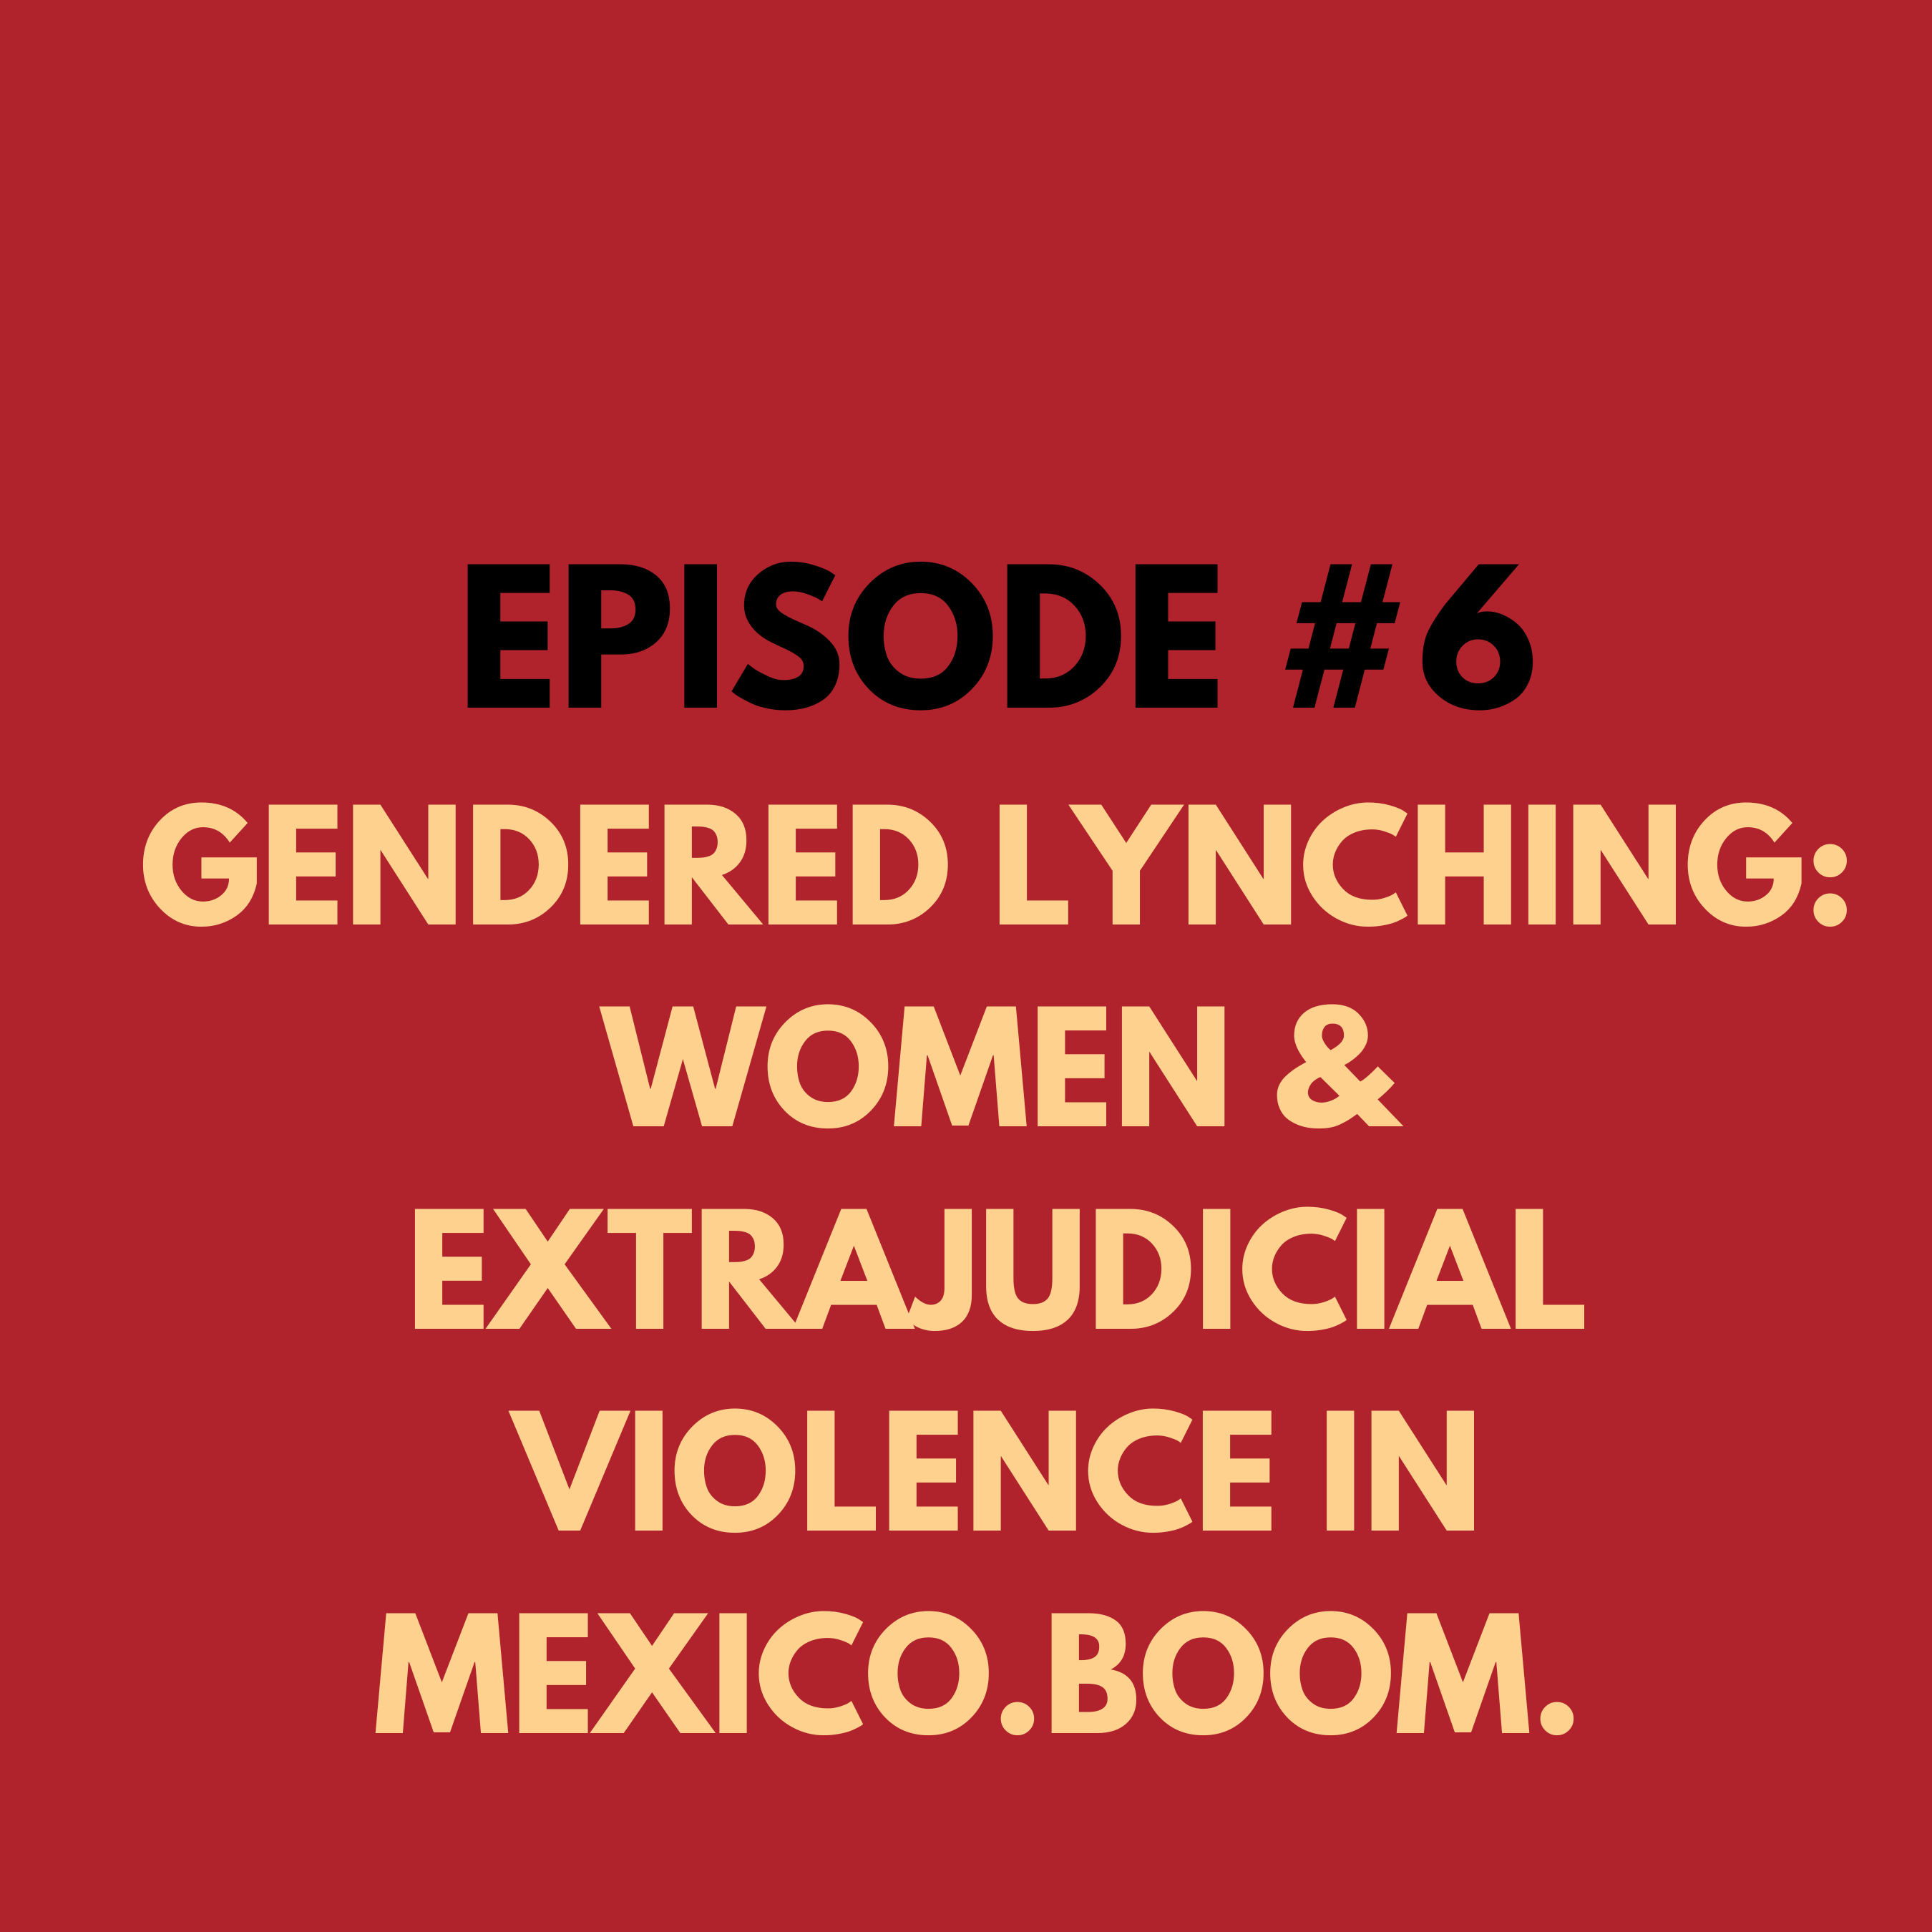 Gendered Lynching: Women & Extrajudicial Violence in Mexico.